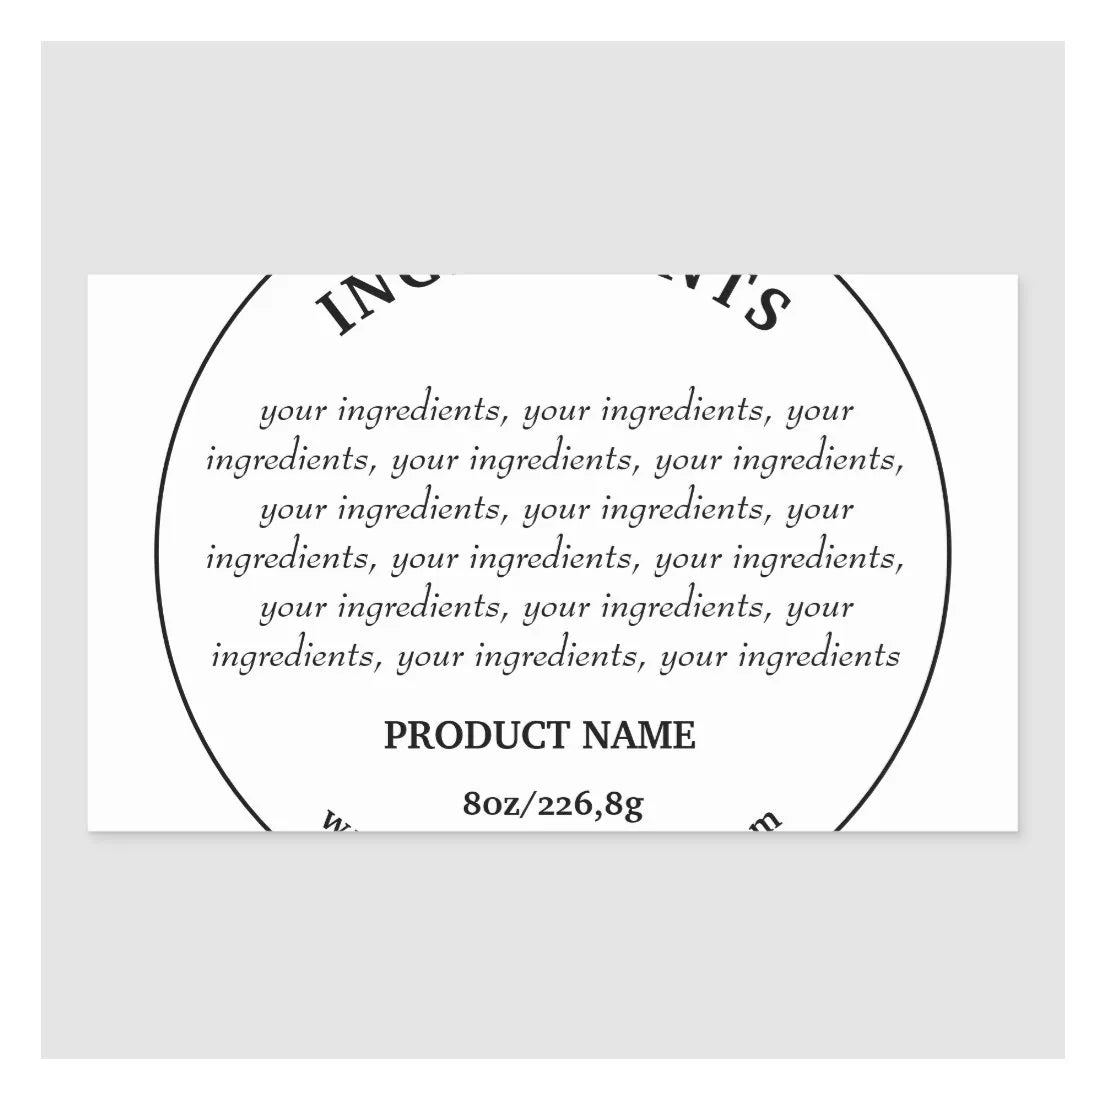 LBSISI Life 1000pcs Custom Stickers Print Logo Personalized Waterproof Paper Roll Stickers Labels Wedding Christmas Decoration